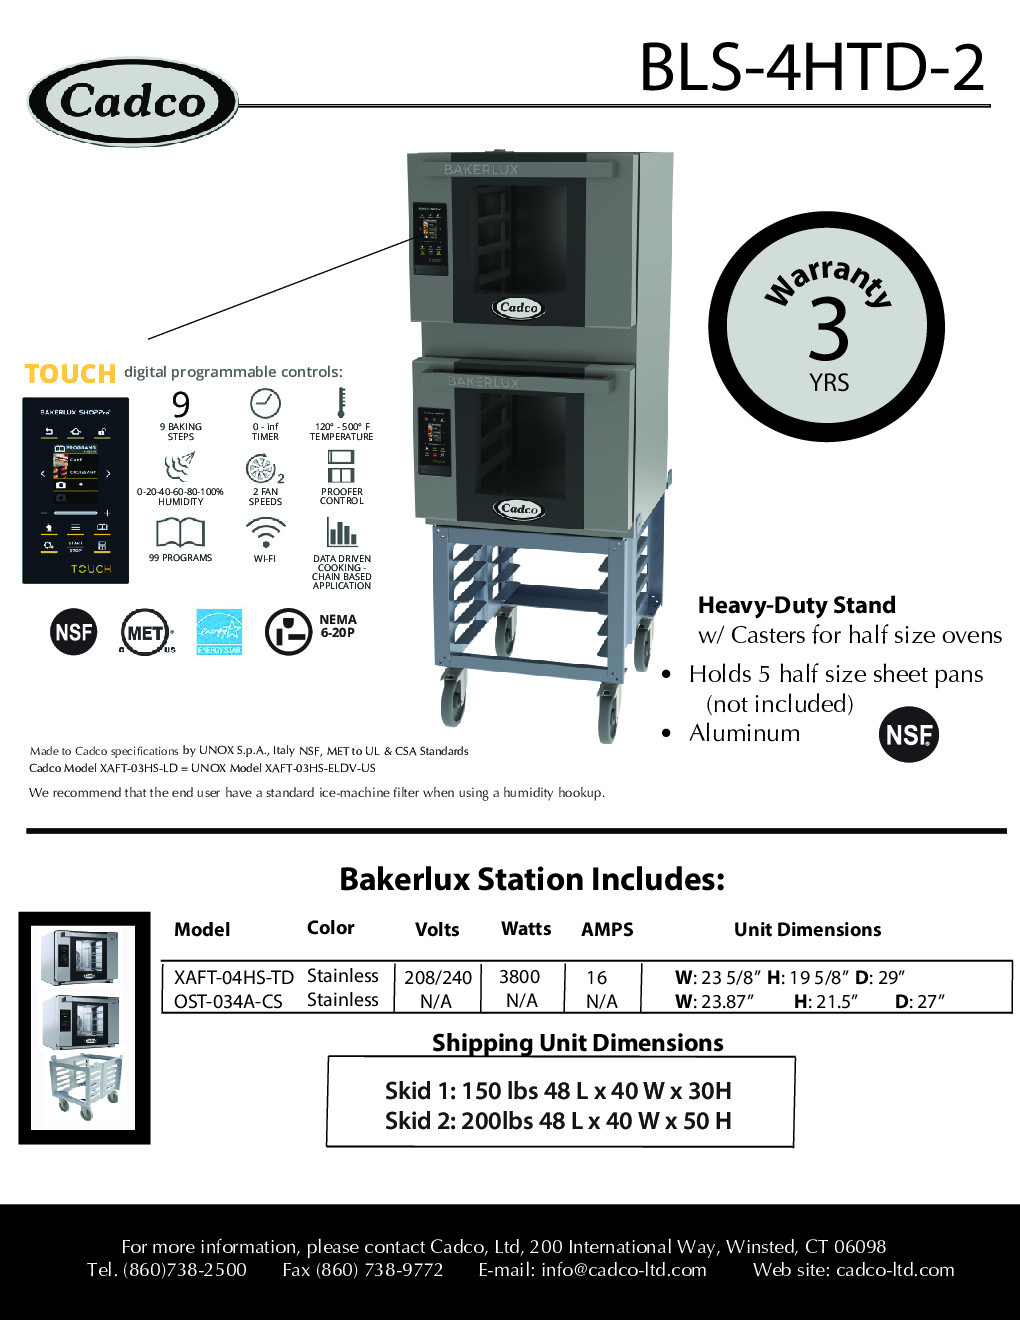 Cadco BLS-4HTD-2 Double-Deck Electric Convection Oven w/ Digital Touch Controls, Half-Size